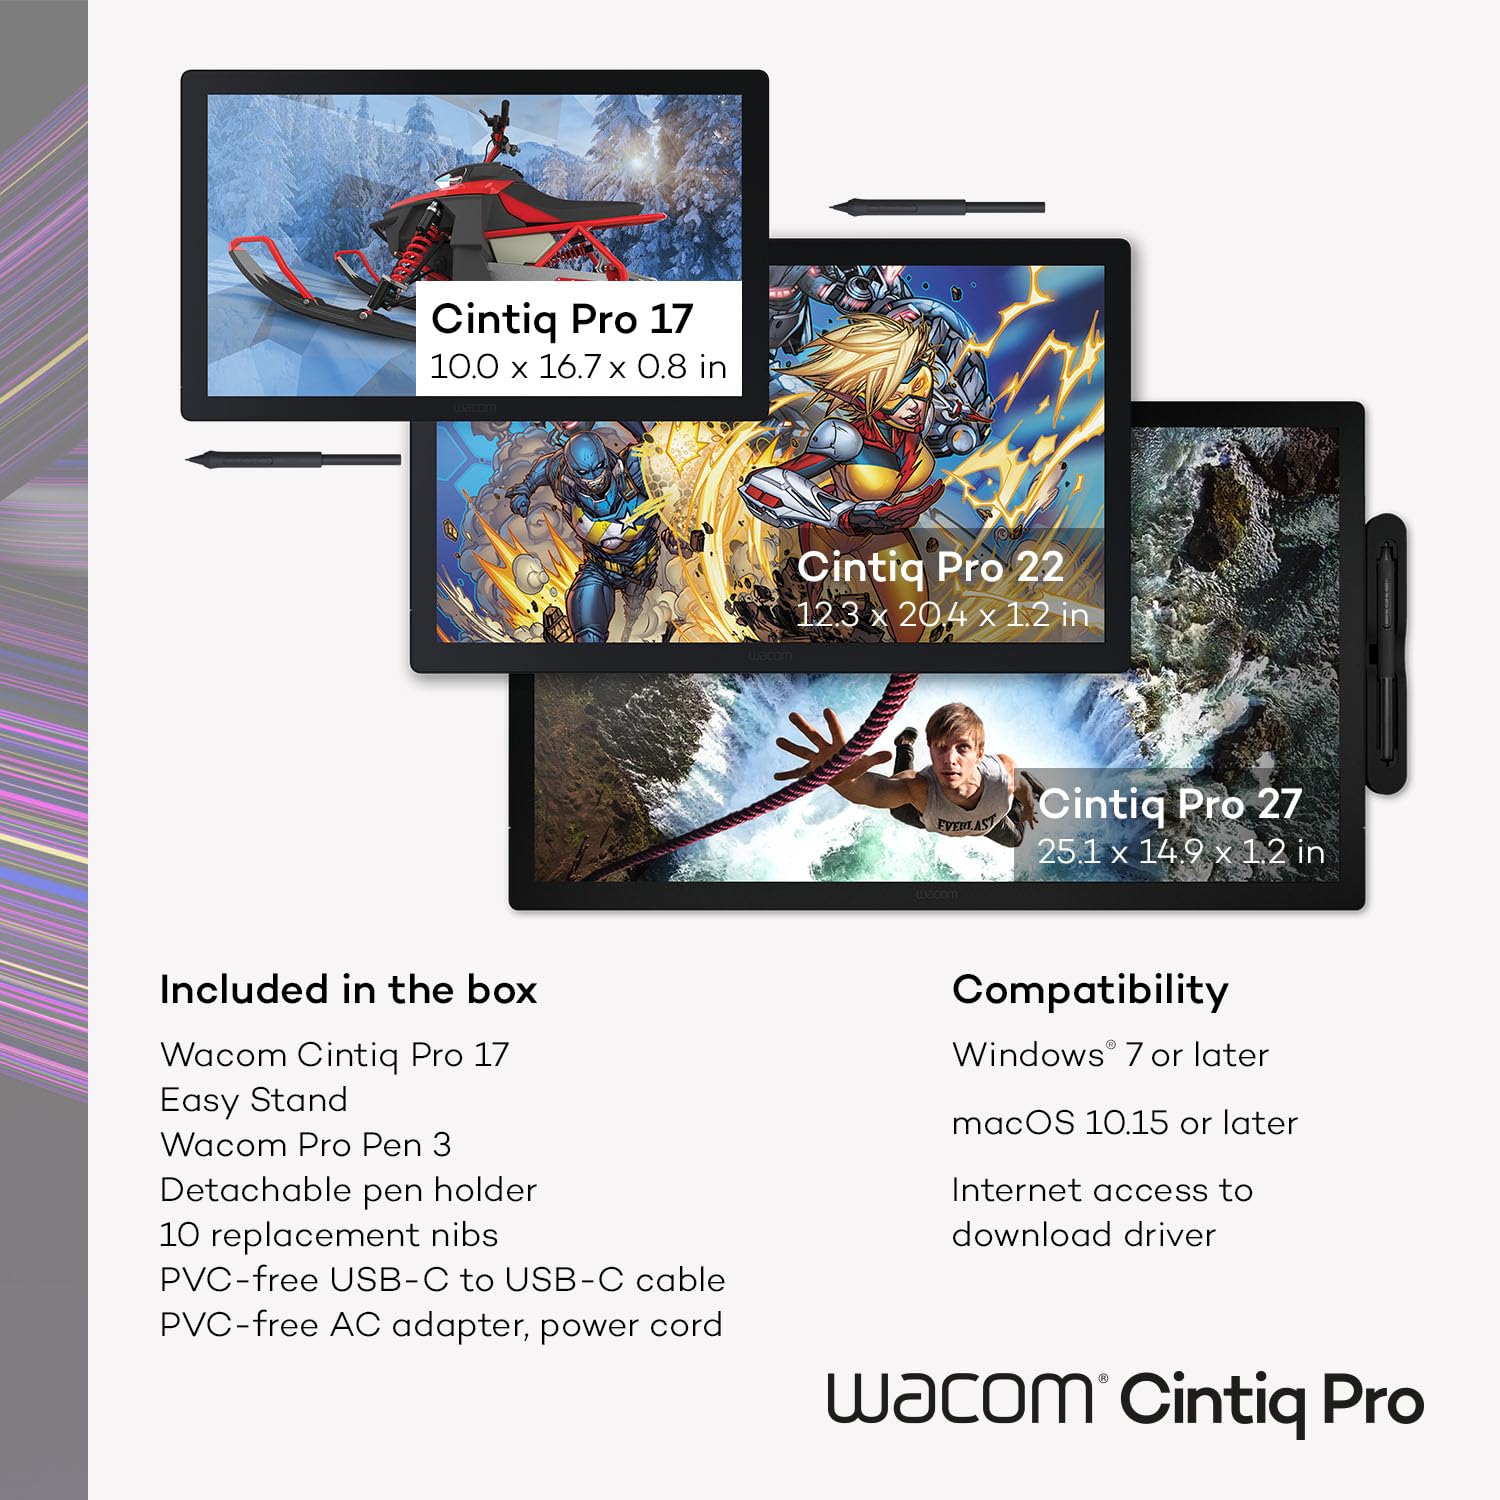 Wacom Cintiq Pro 17 Drawing Tablet with Screen; 4K UHD Touchscreen Graphic Drawing Display with 1.07 Billion Colors, 120Hz Refresh Rate & 8192 Pen Pressure for Windows PC, Mac, Linux (DTH172K0A)